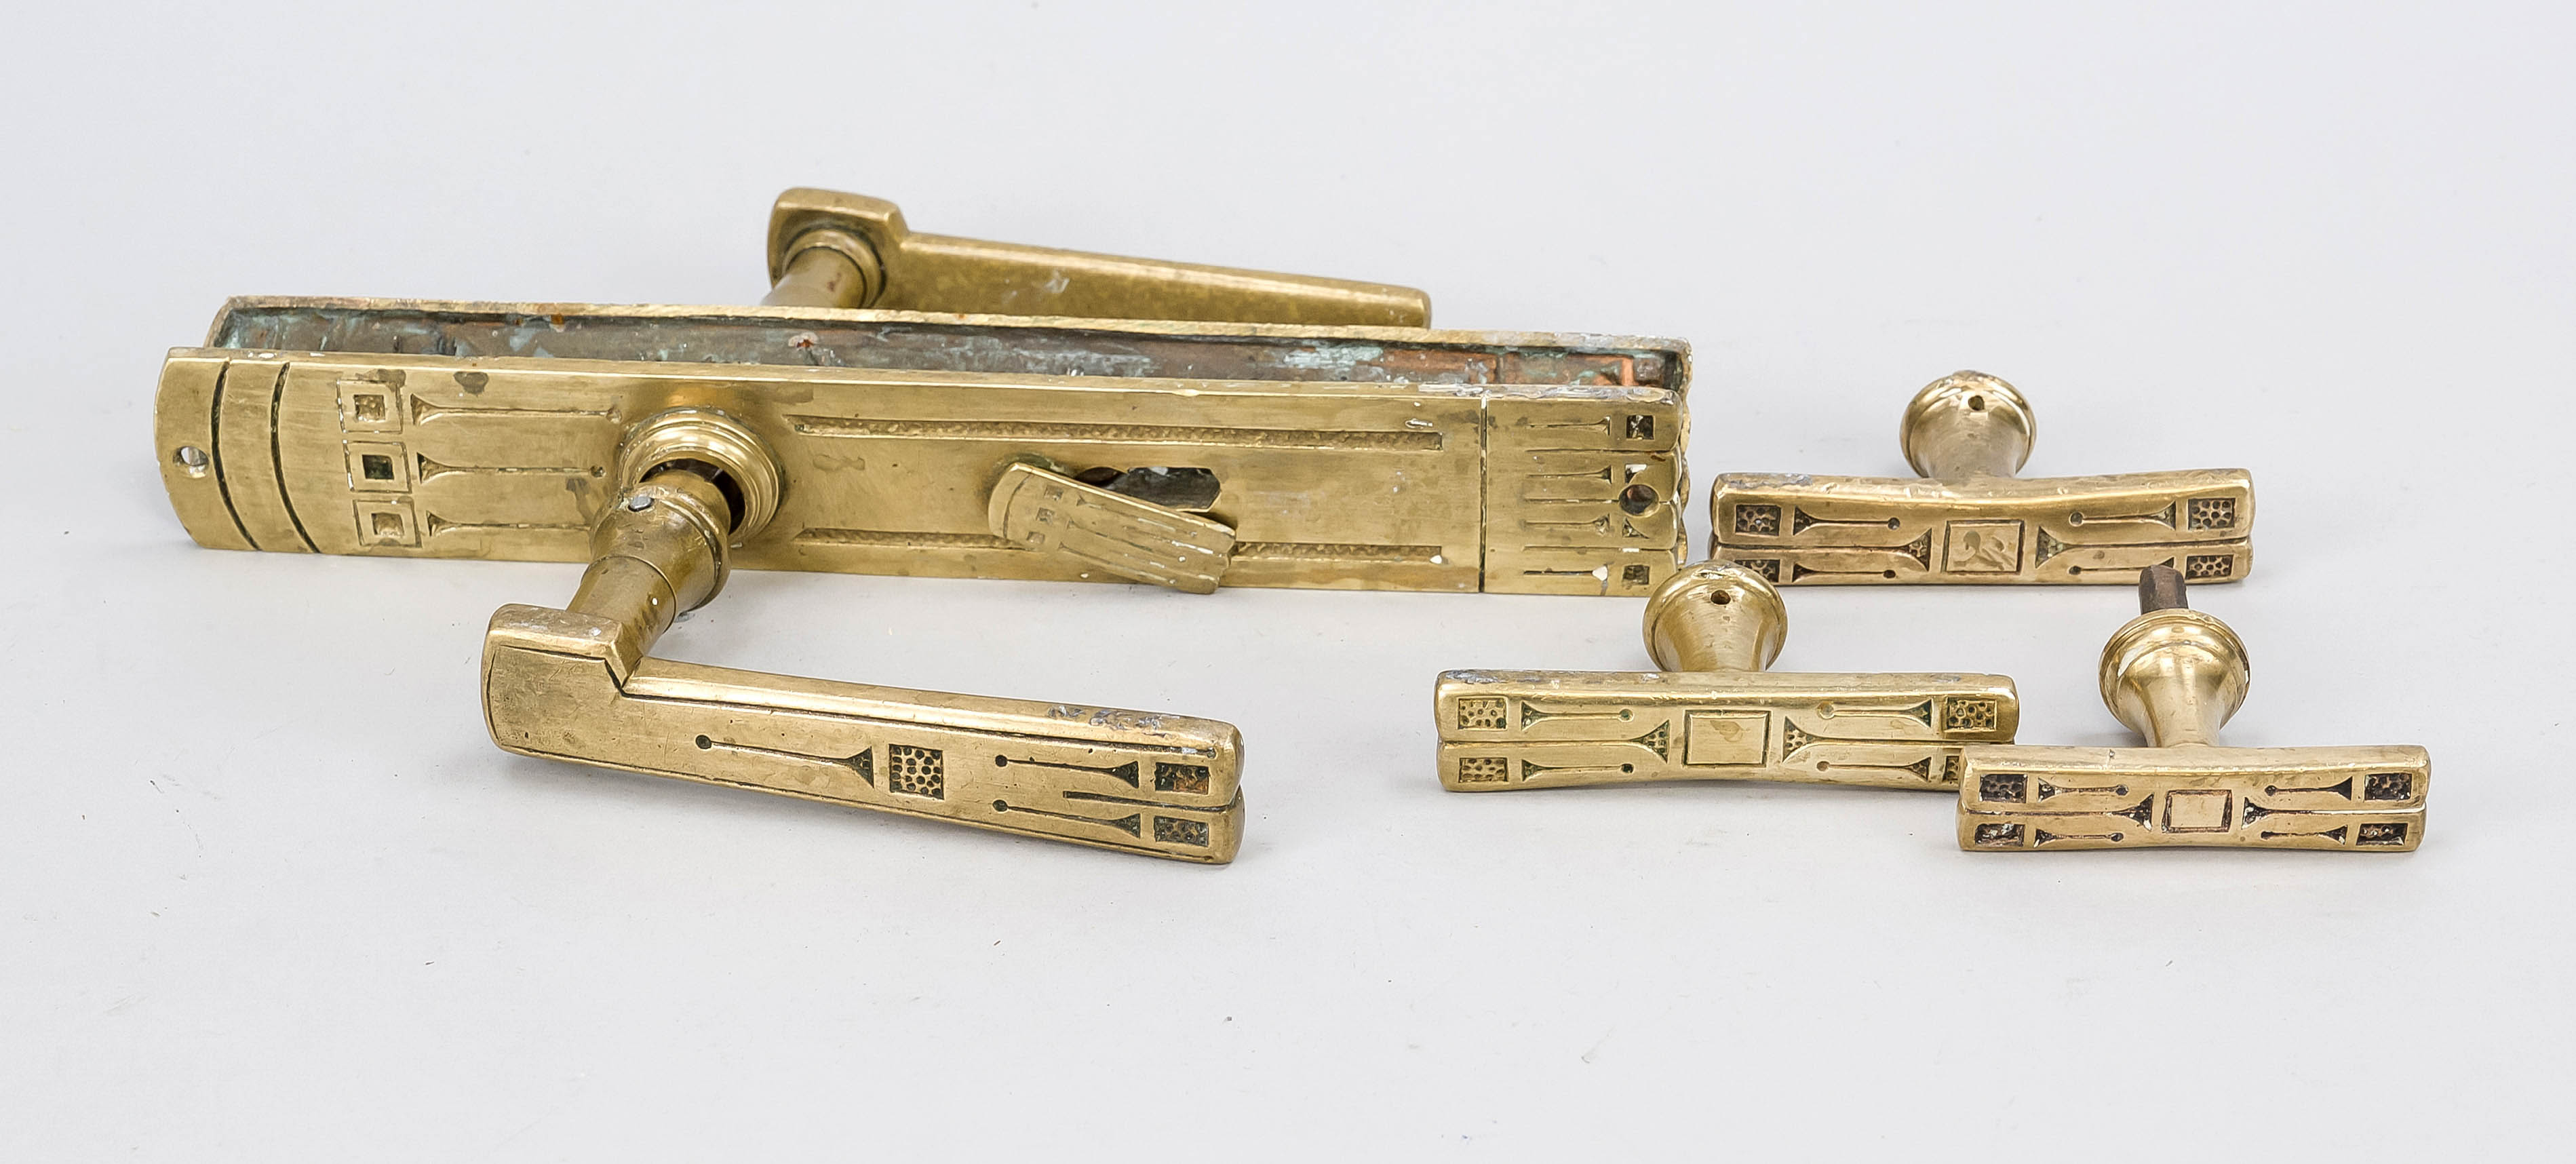 Lever handle set, early 20th century, brass. Passive cover with geometric ornament, profiled and